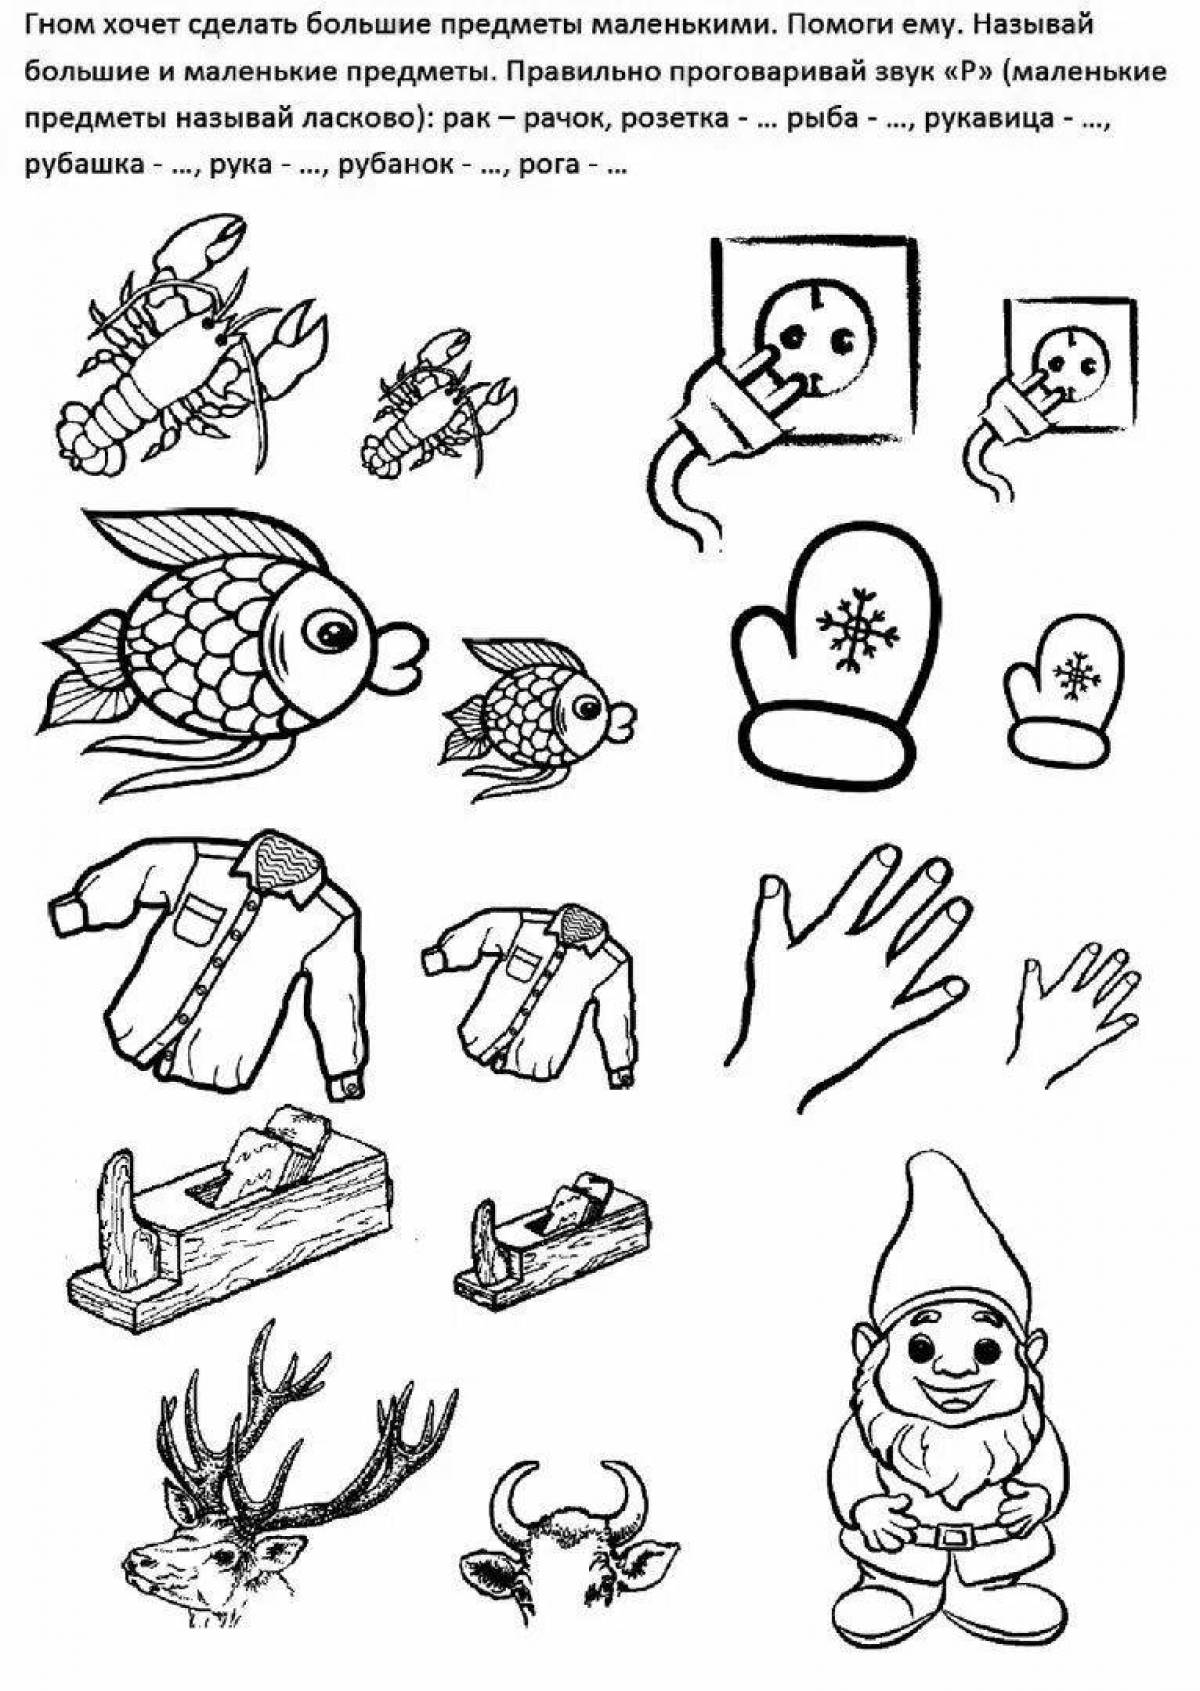 Attractive speech therapy audio coloring page p